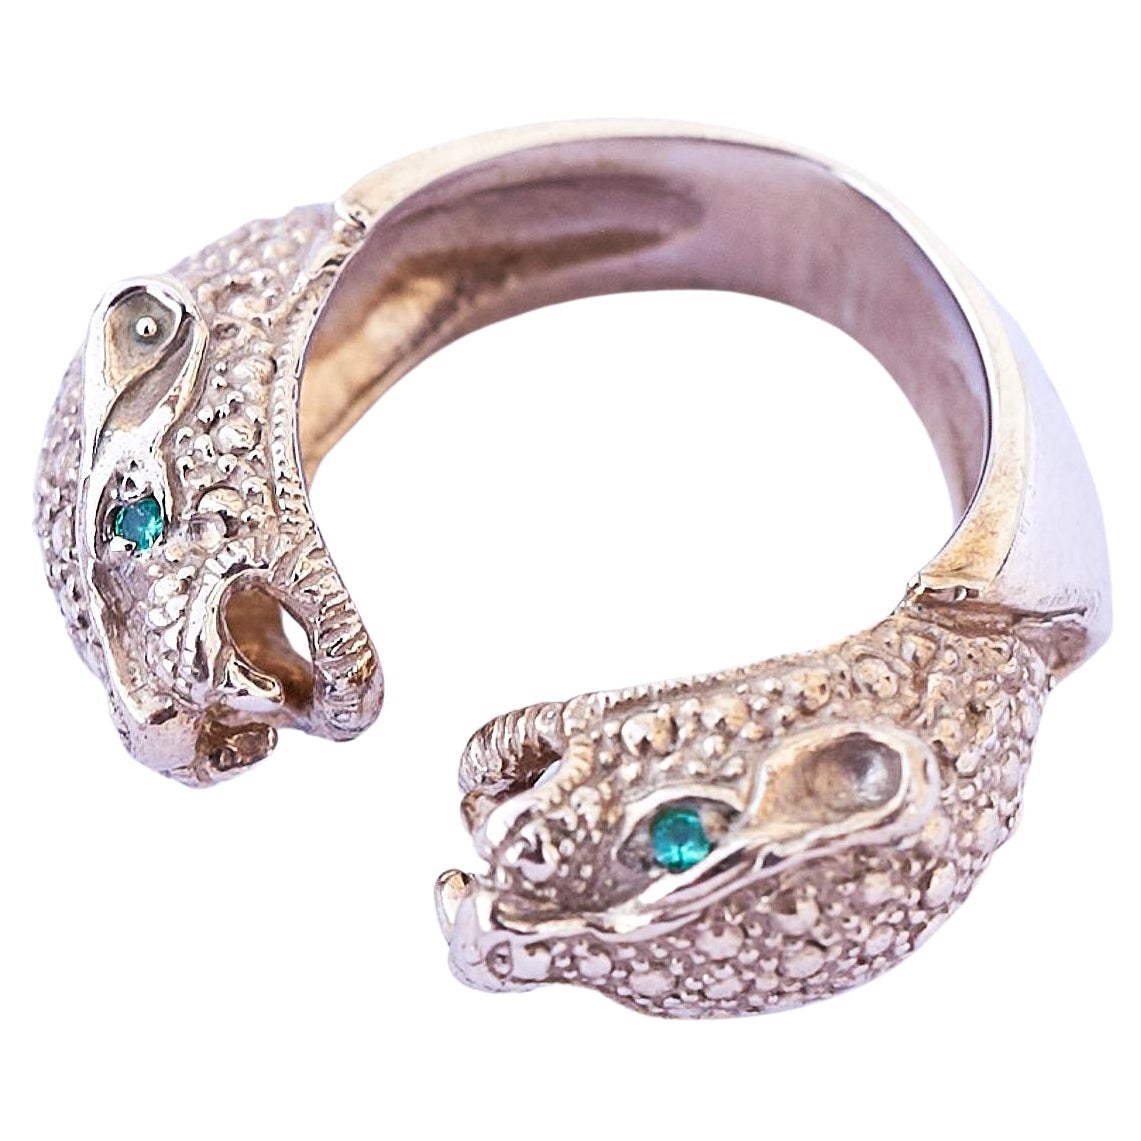 Emerald Jaguar Panther Ring Bronze Cocktail Ring Animal Jewelry j Dauphin For Sale